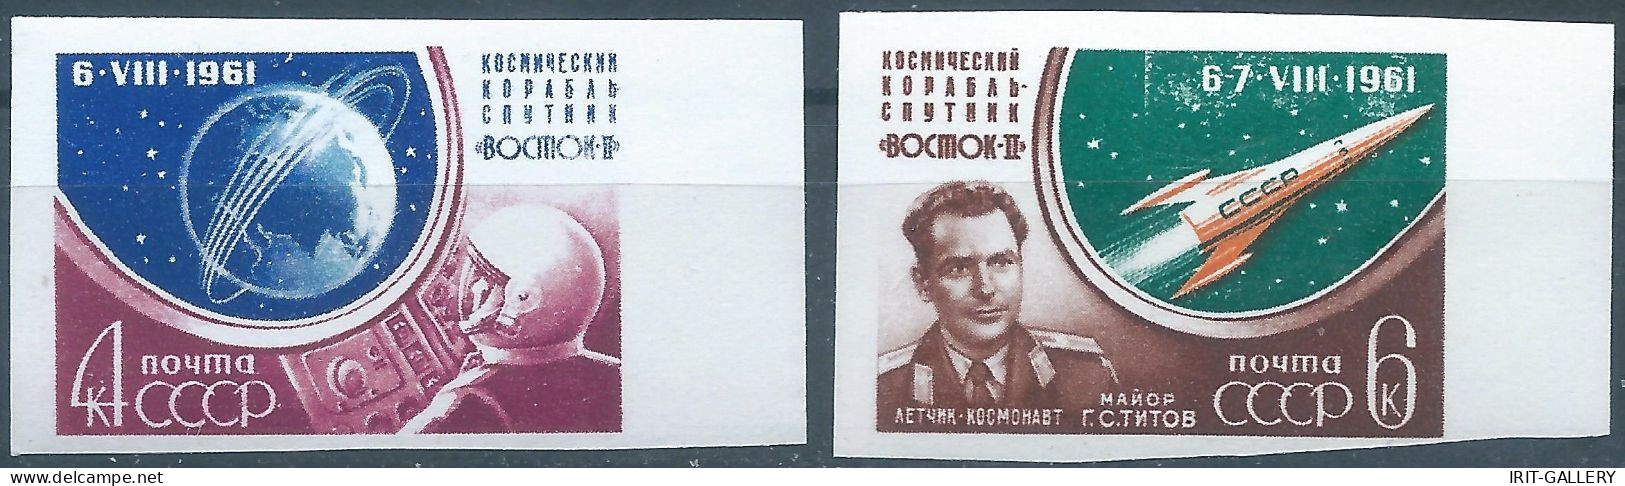 Russia-Union Of Soviet-CCCP,1961 The Second Manned Space Flight,IMPERF,Mint - Russie & URSS